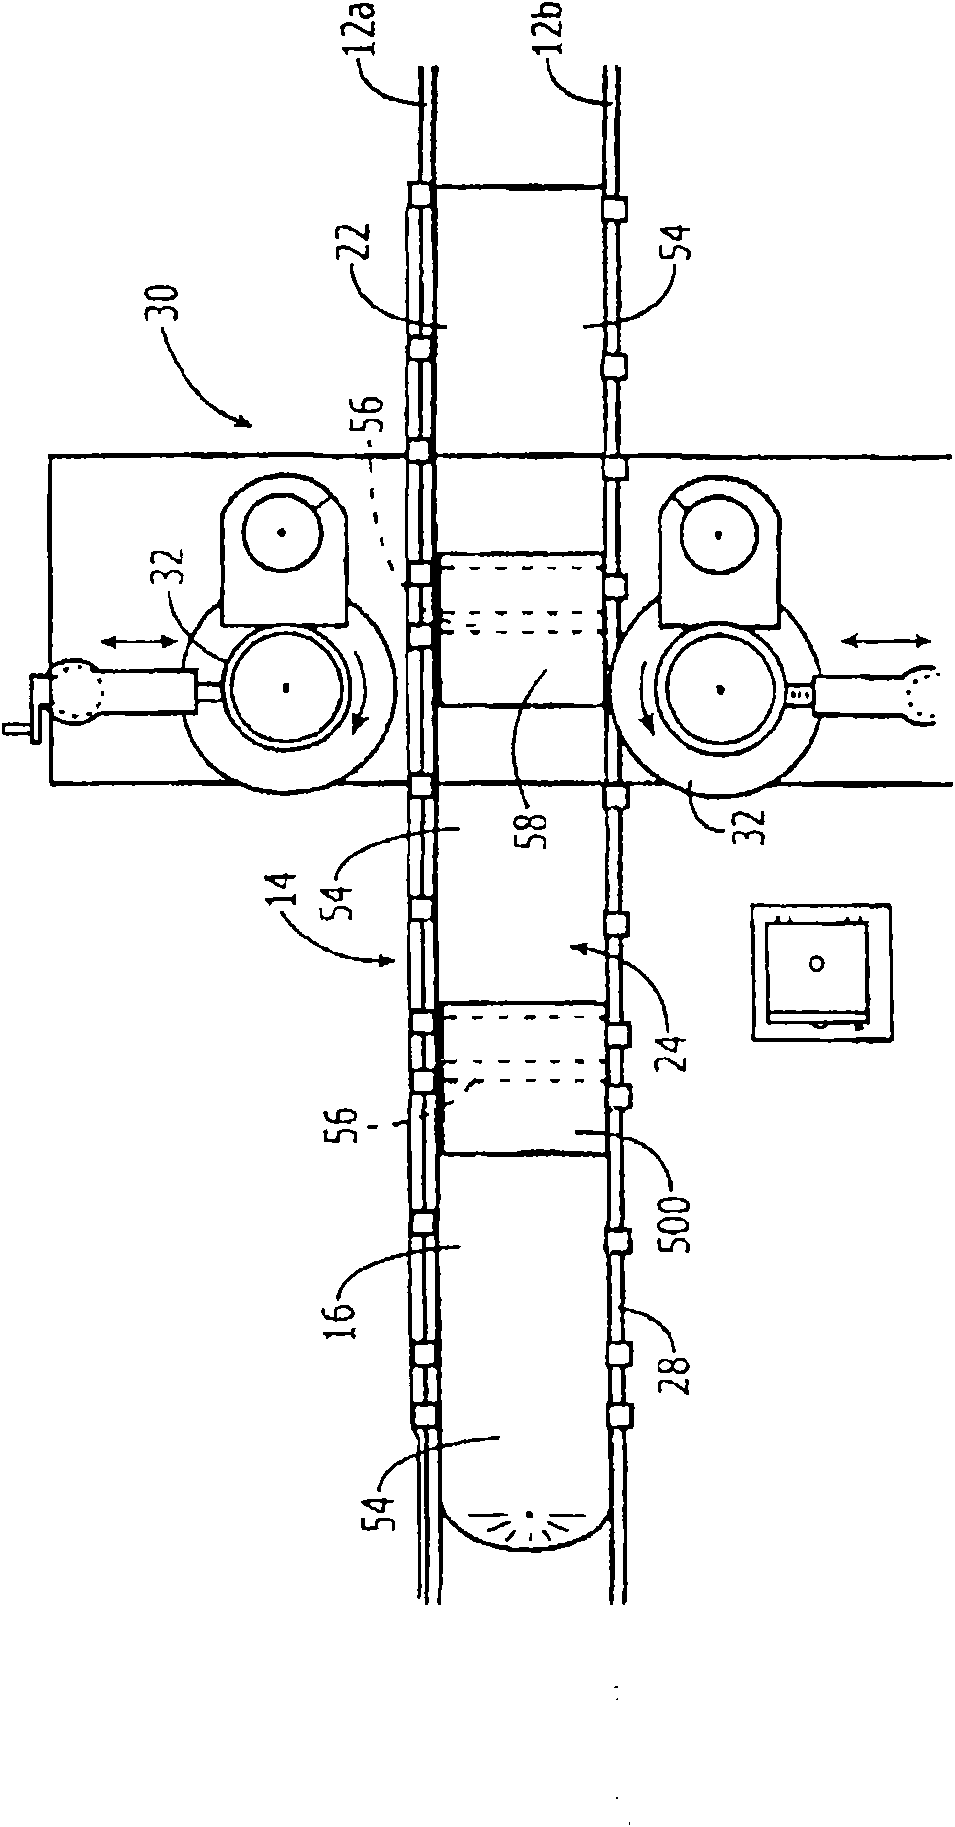 Method of controlling a rail transport system for conveying bulk materials